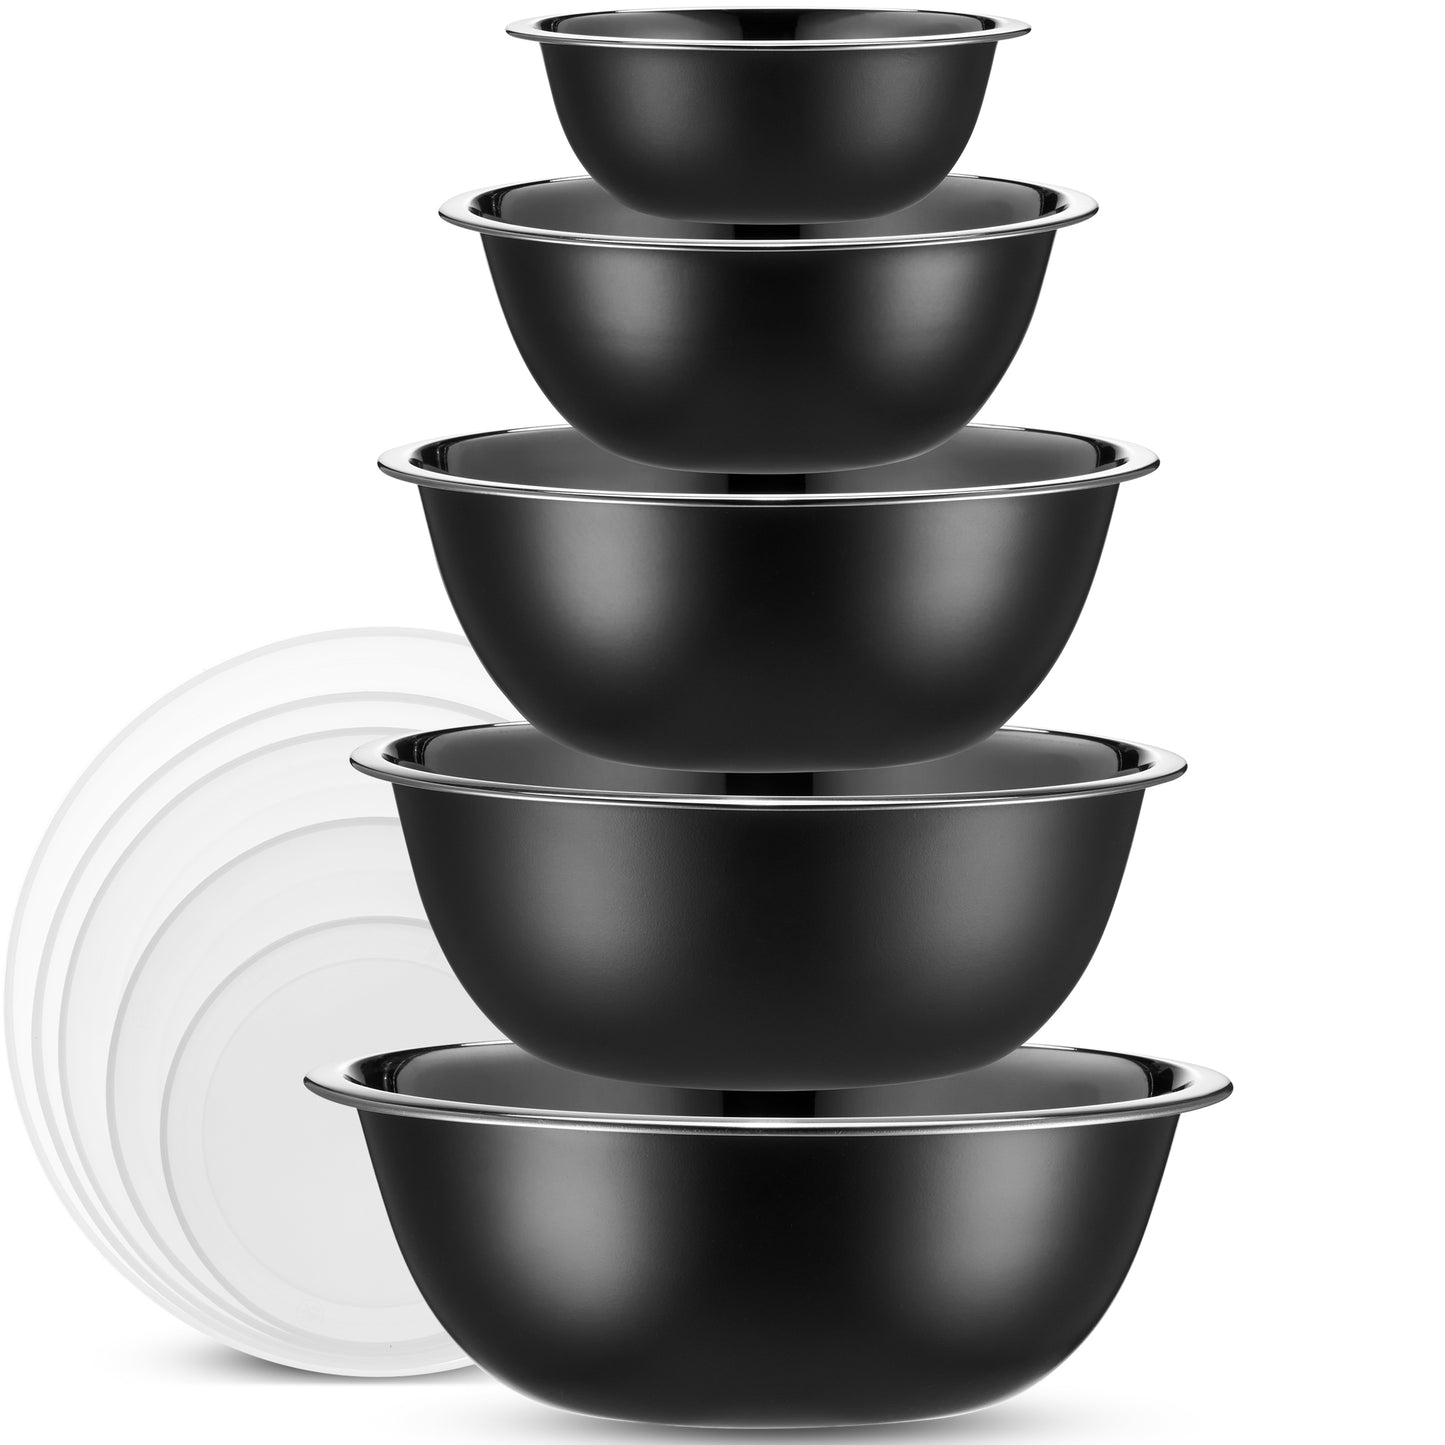 Stainless Steel Mixing Bowls With Lids Set, Black